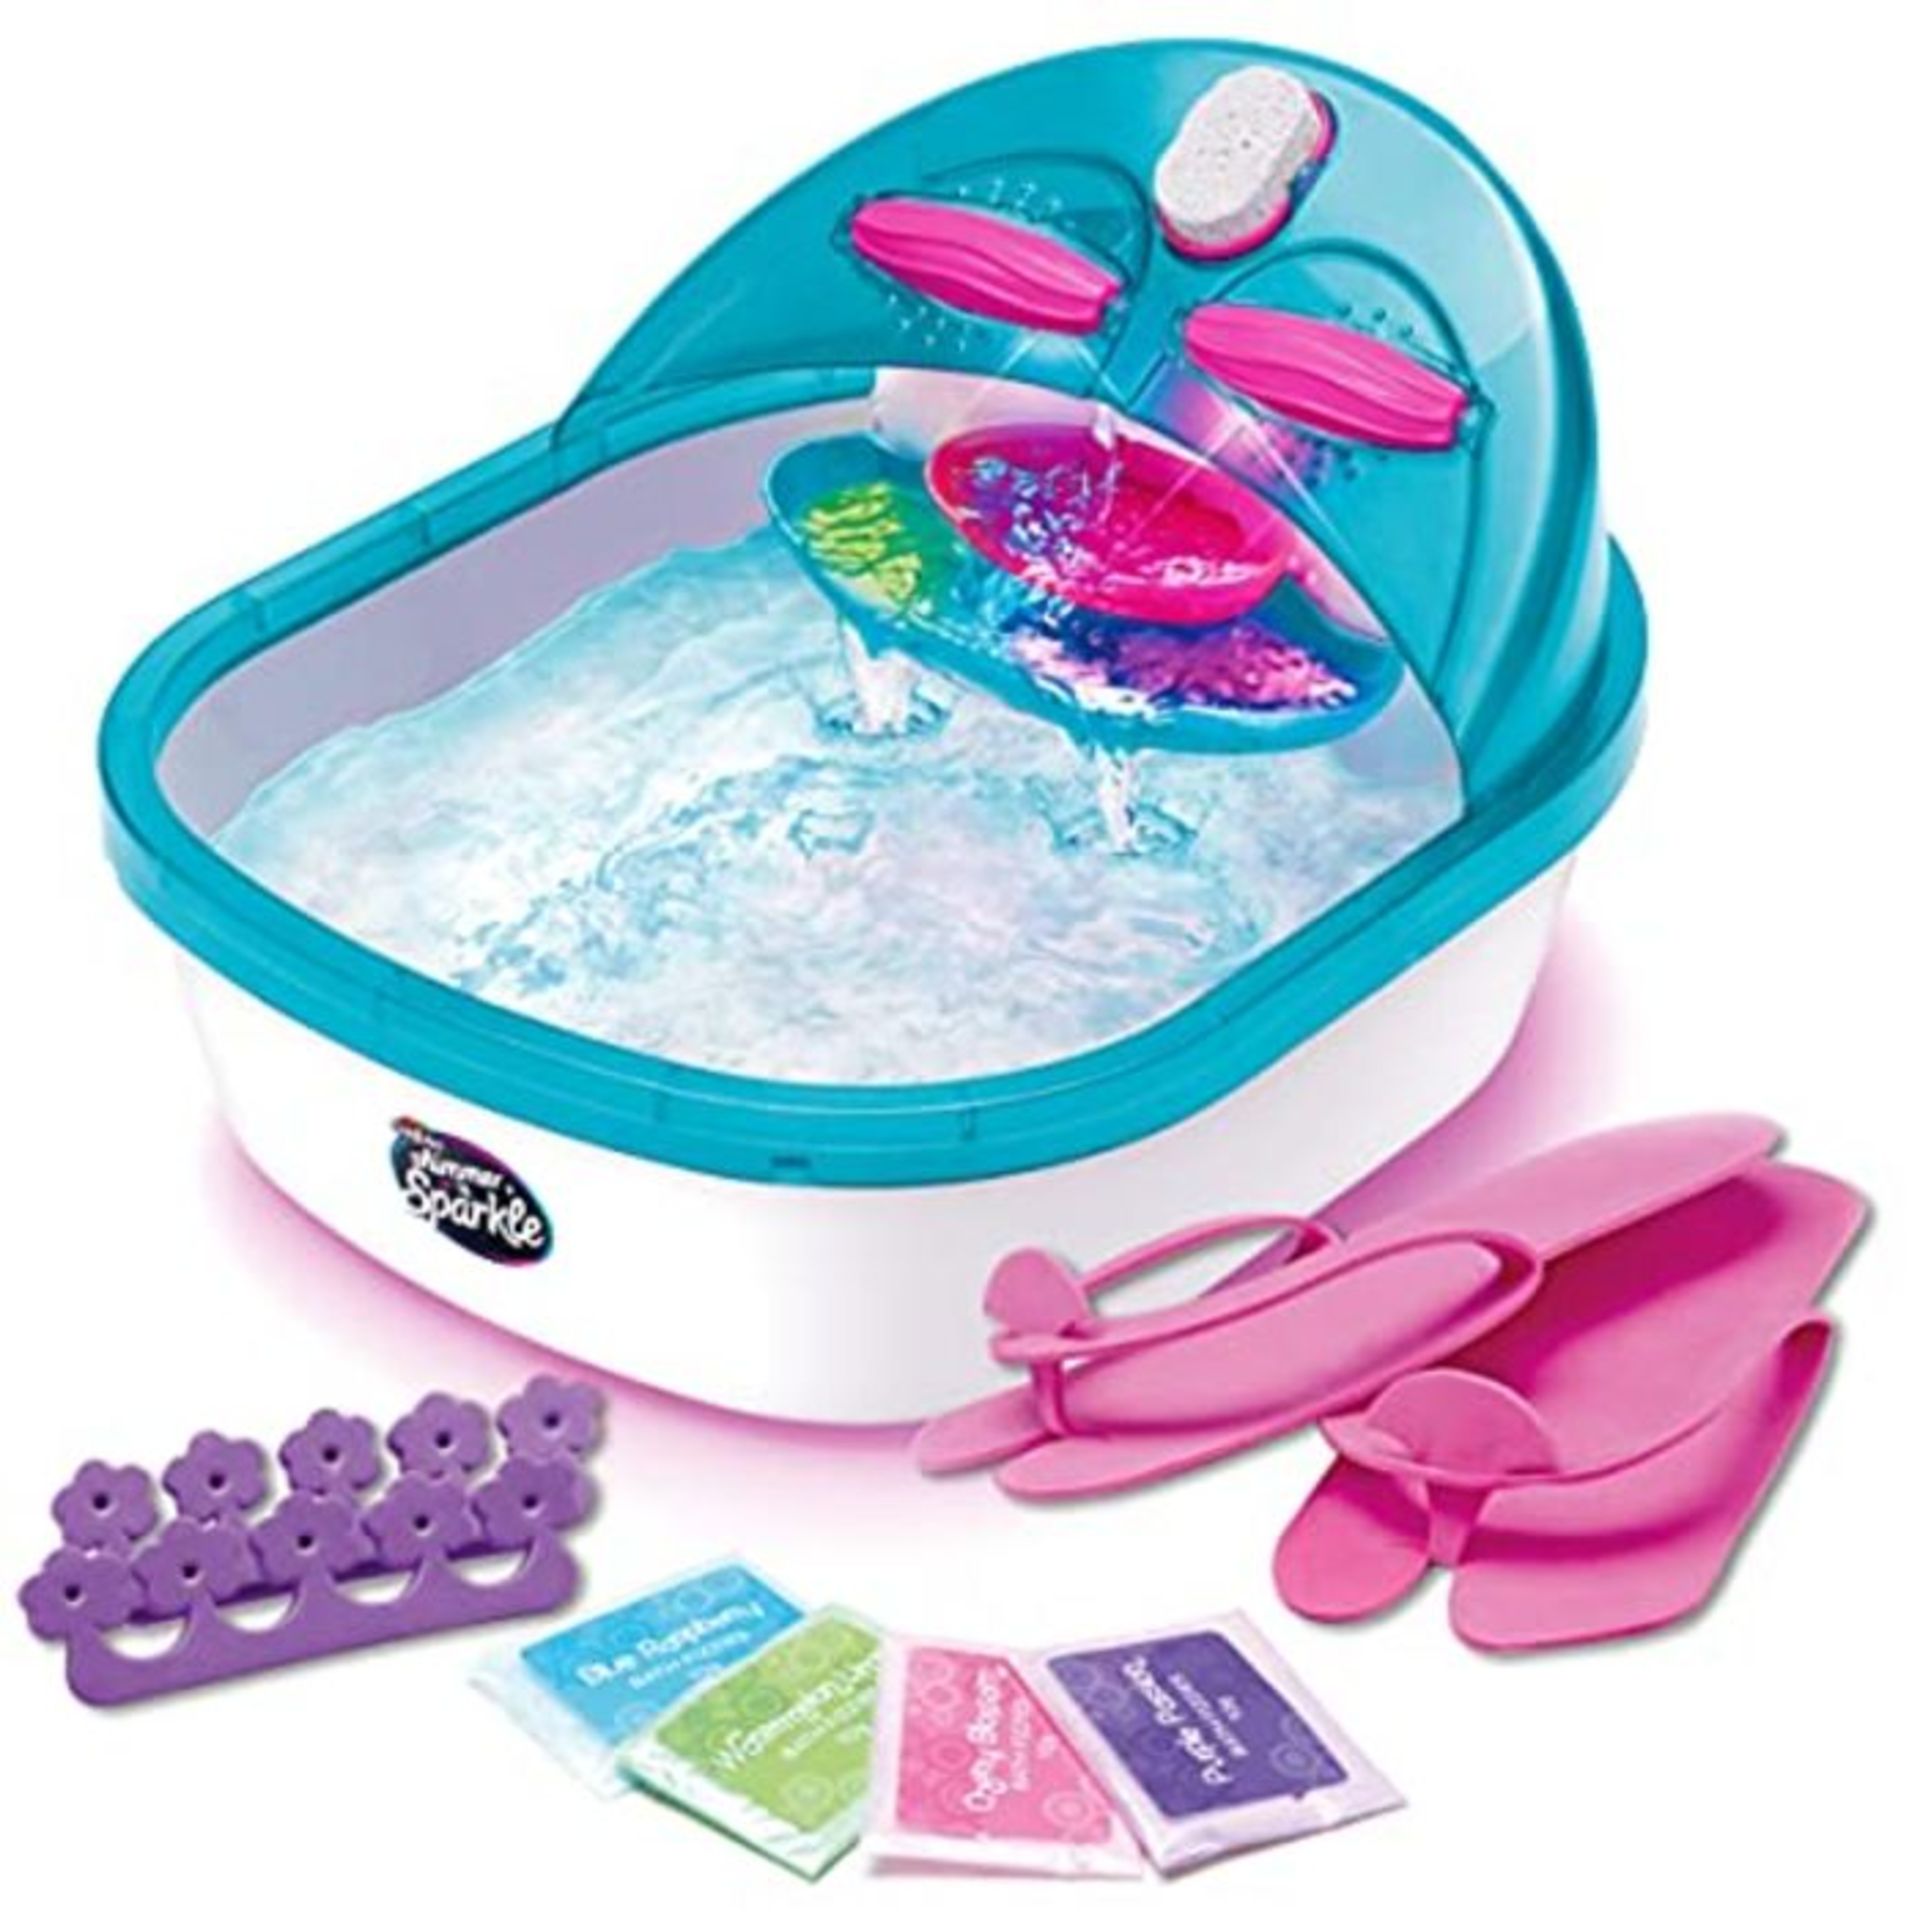 Shimmer N Sparkle 6in1 Real Foot Massaging pedicure spa - colour-changing massaging, r